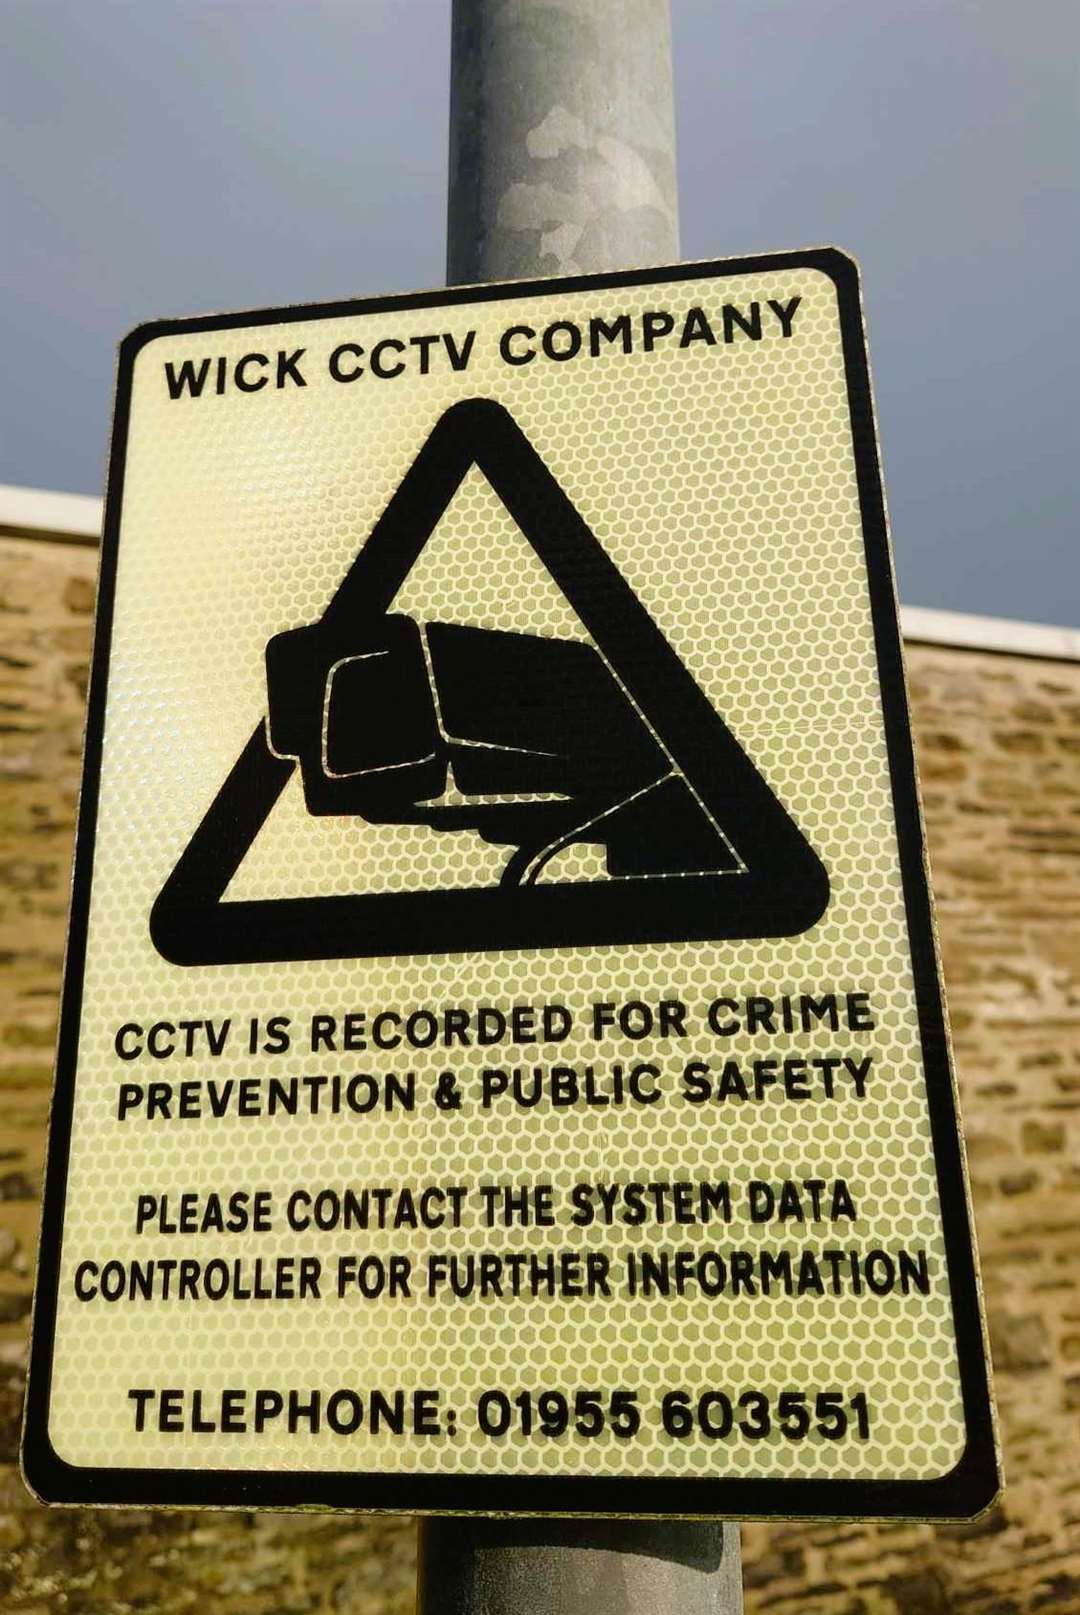 The CCTV sign at a car park near the Highland Council offices in Wick has an unobtainable number.